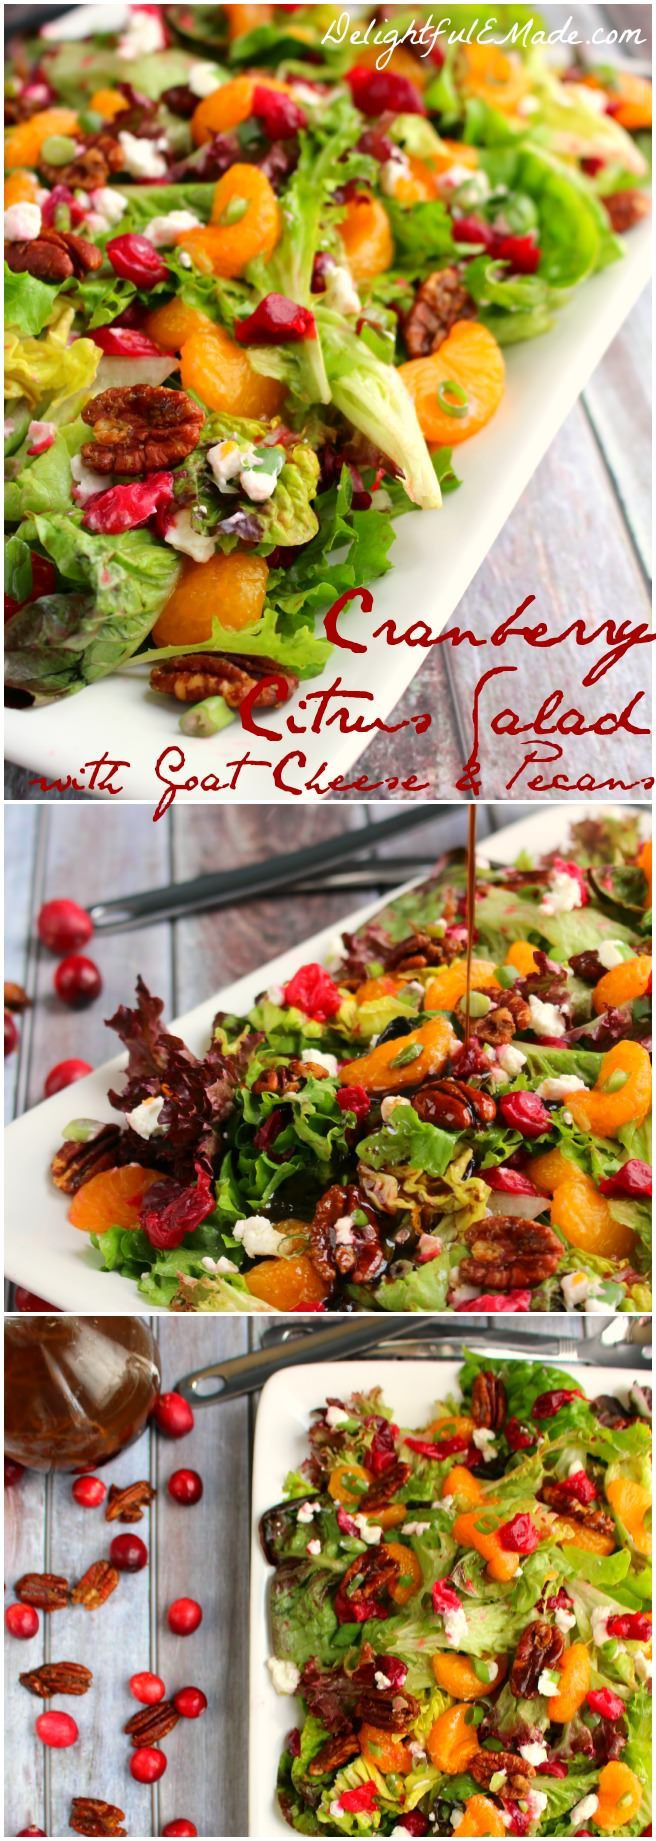 Salads For Christmas Dinner Recipes
 253 best images about Recipes for Salads on Pinterest